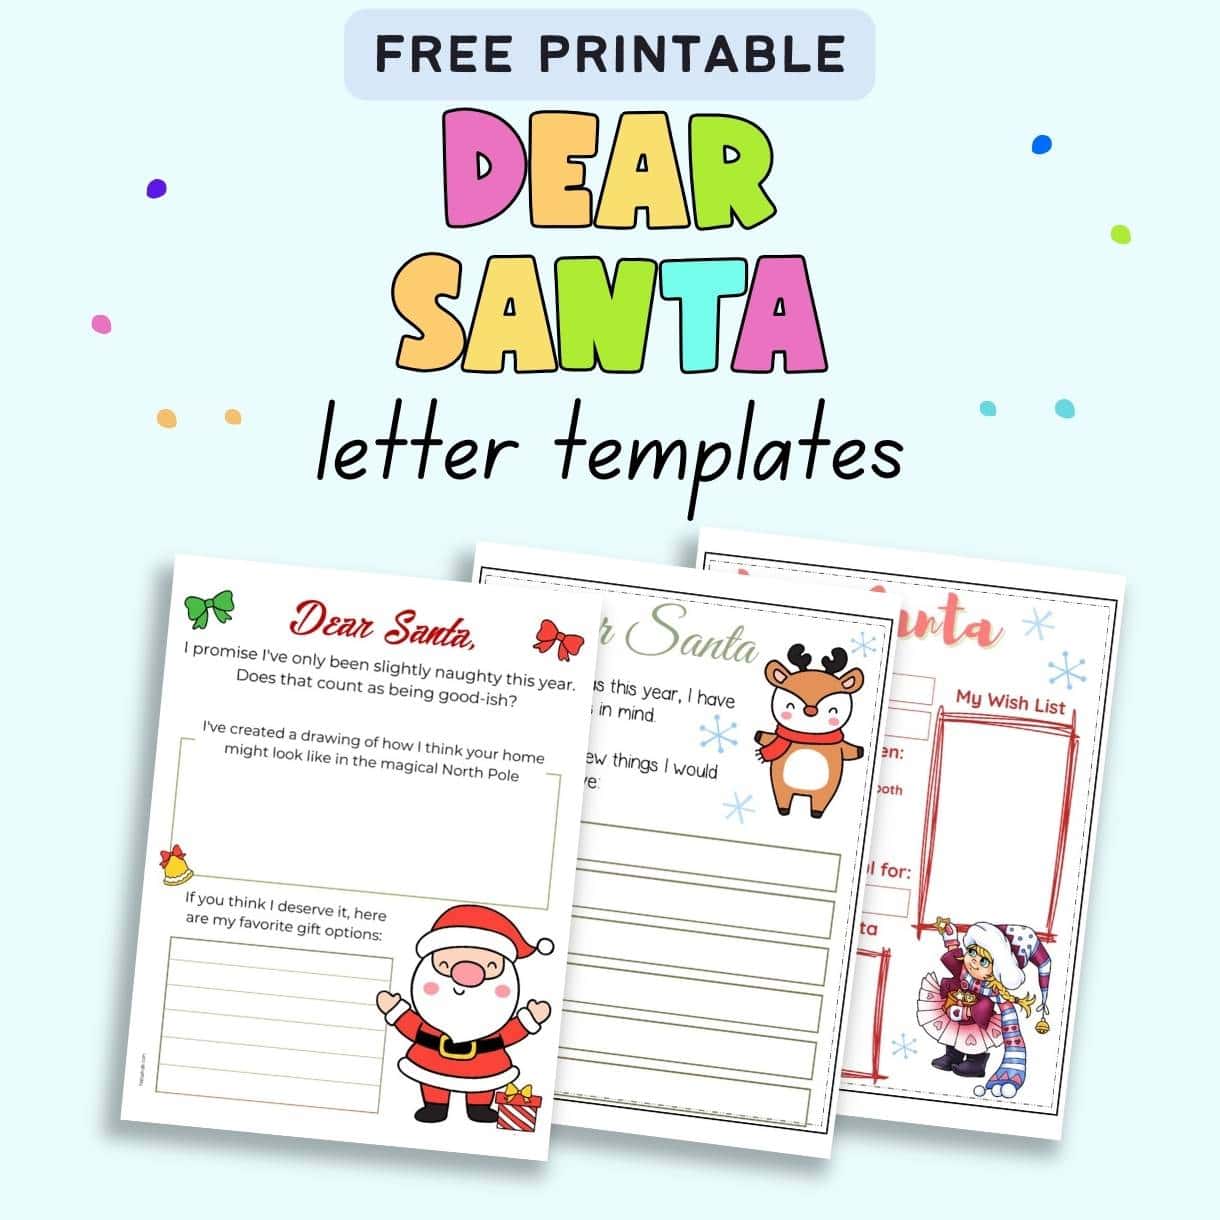 Text "free printable Dear Santa letter templates" with a preview of three fill in the blank Santa letters